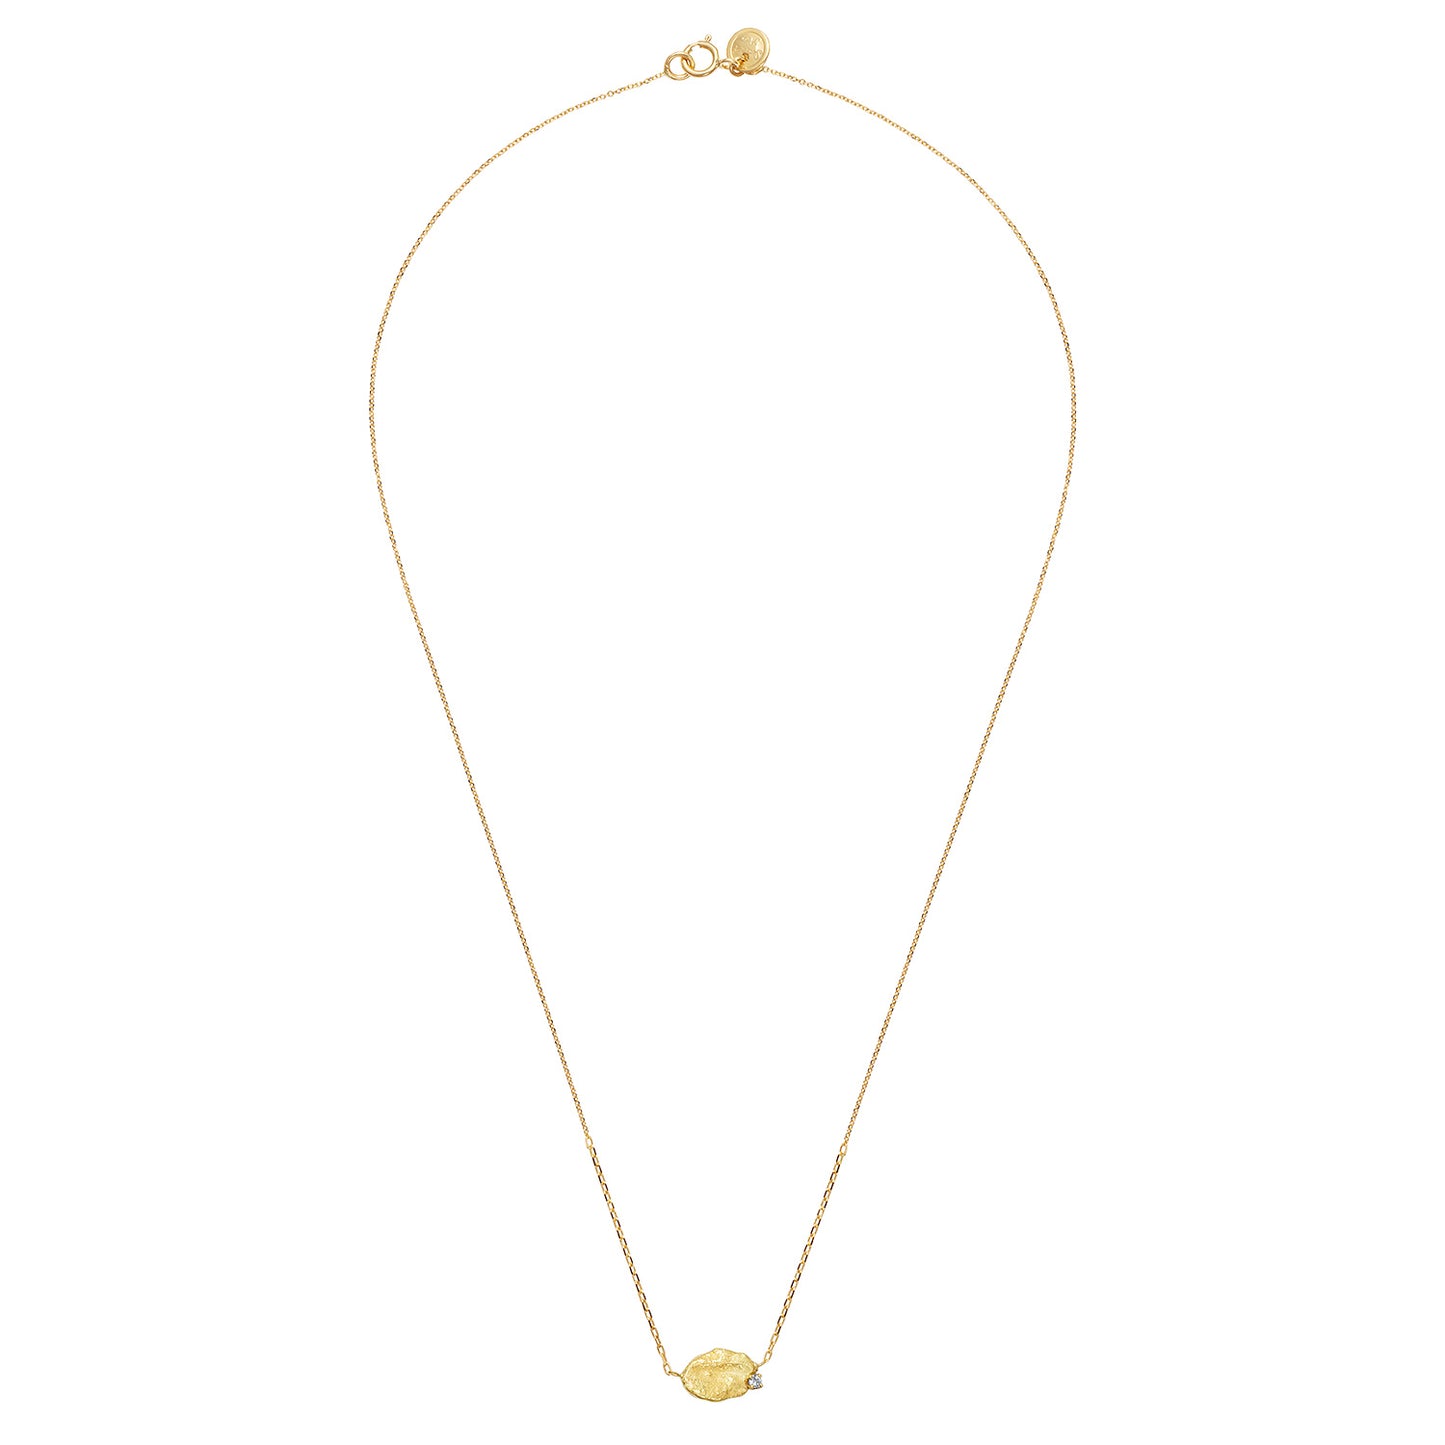 Sweet Pea Moonscape recycled 18ct yellow gold nugget short chain necklace set with white diamond.